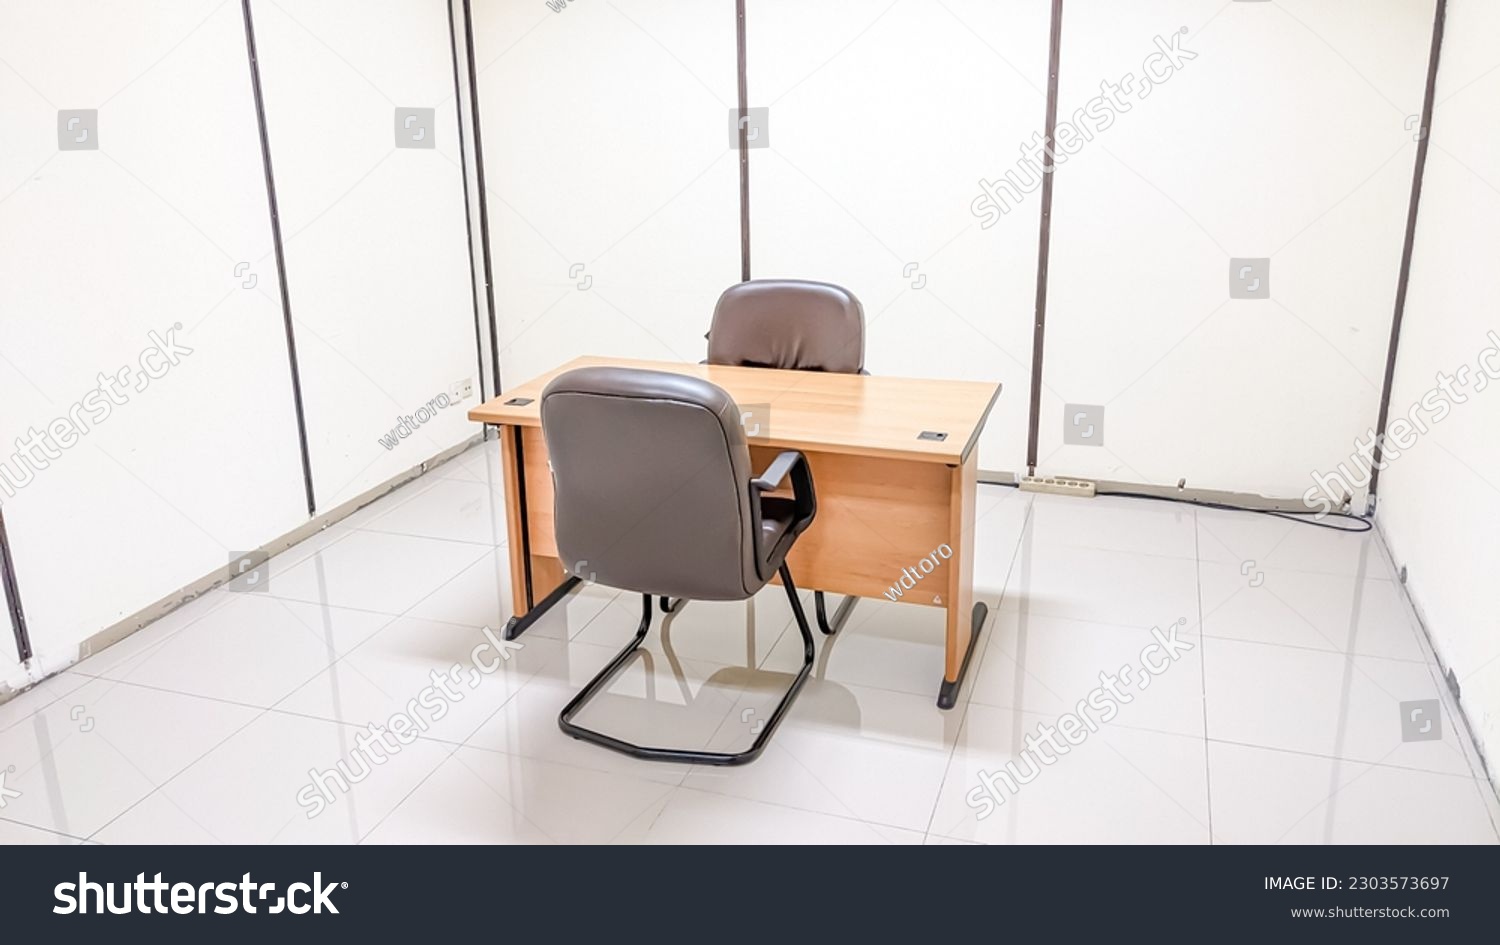 Wooden table furniture and two modern armchairs in the interrogation room #2303573697